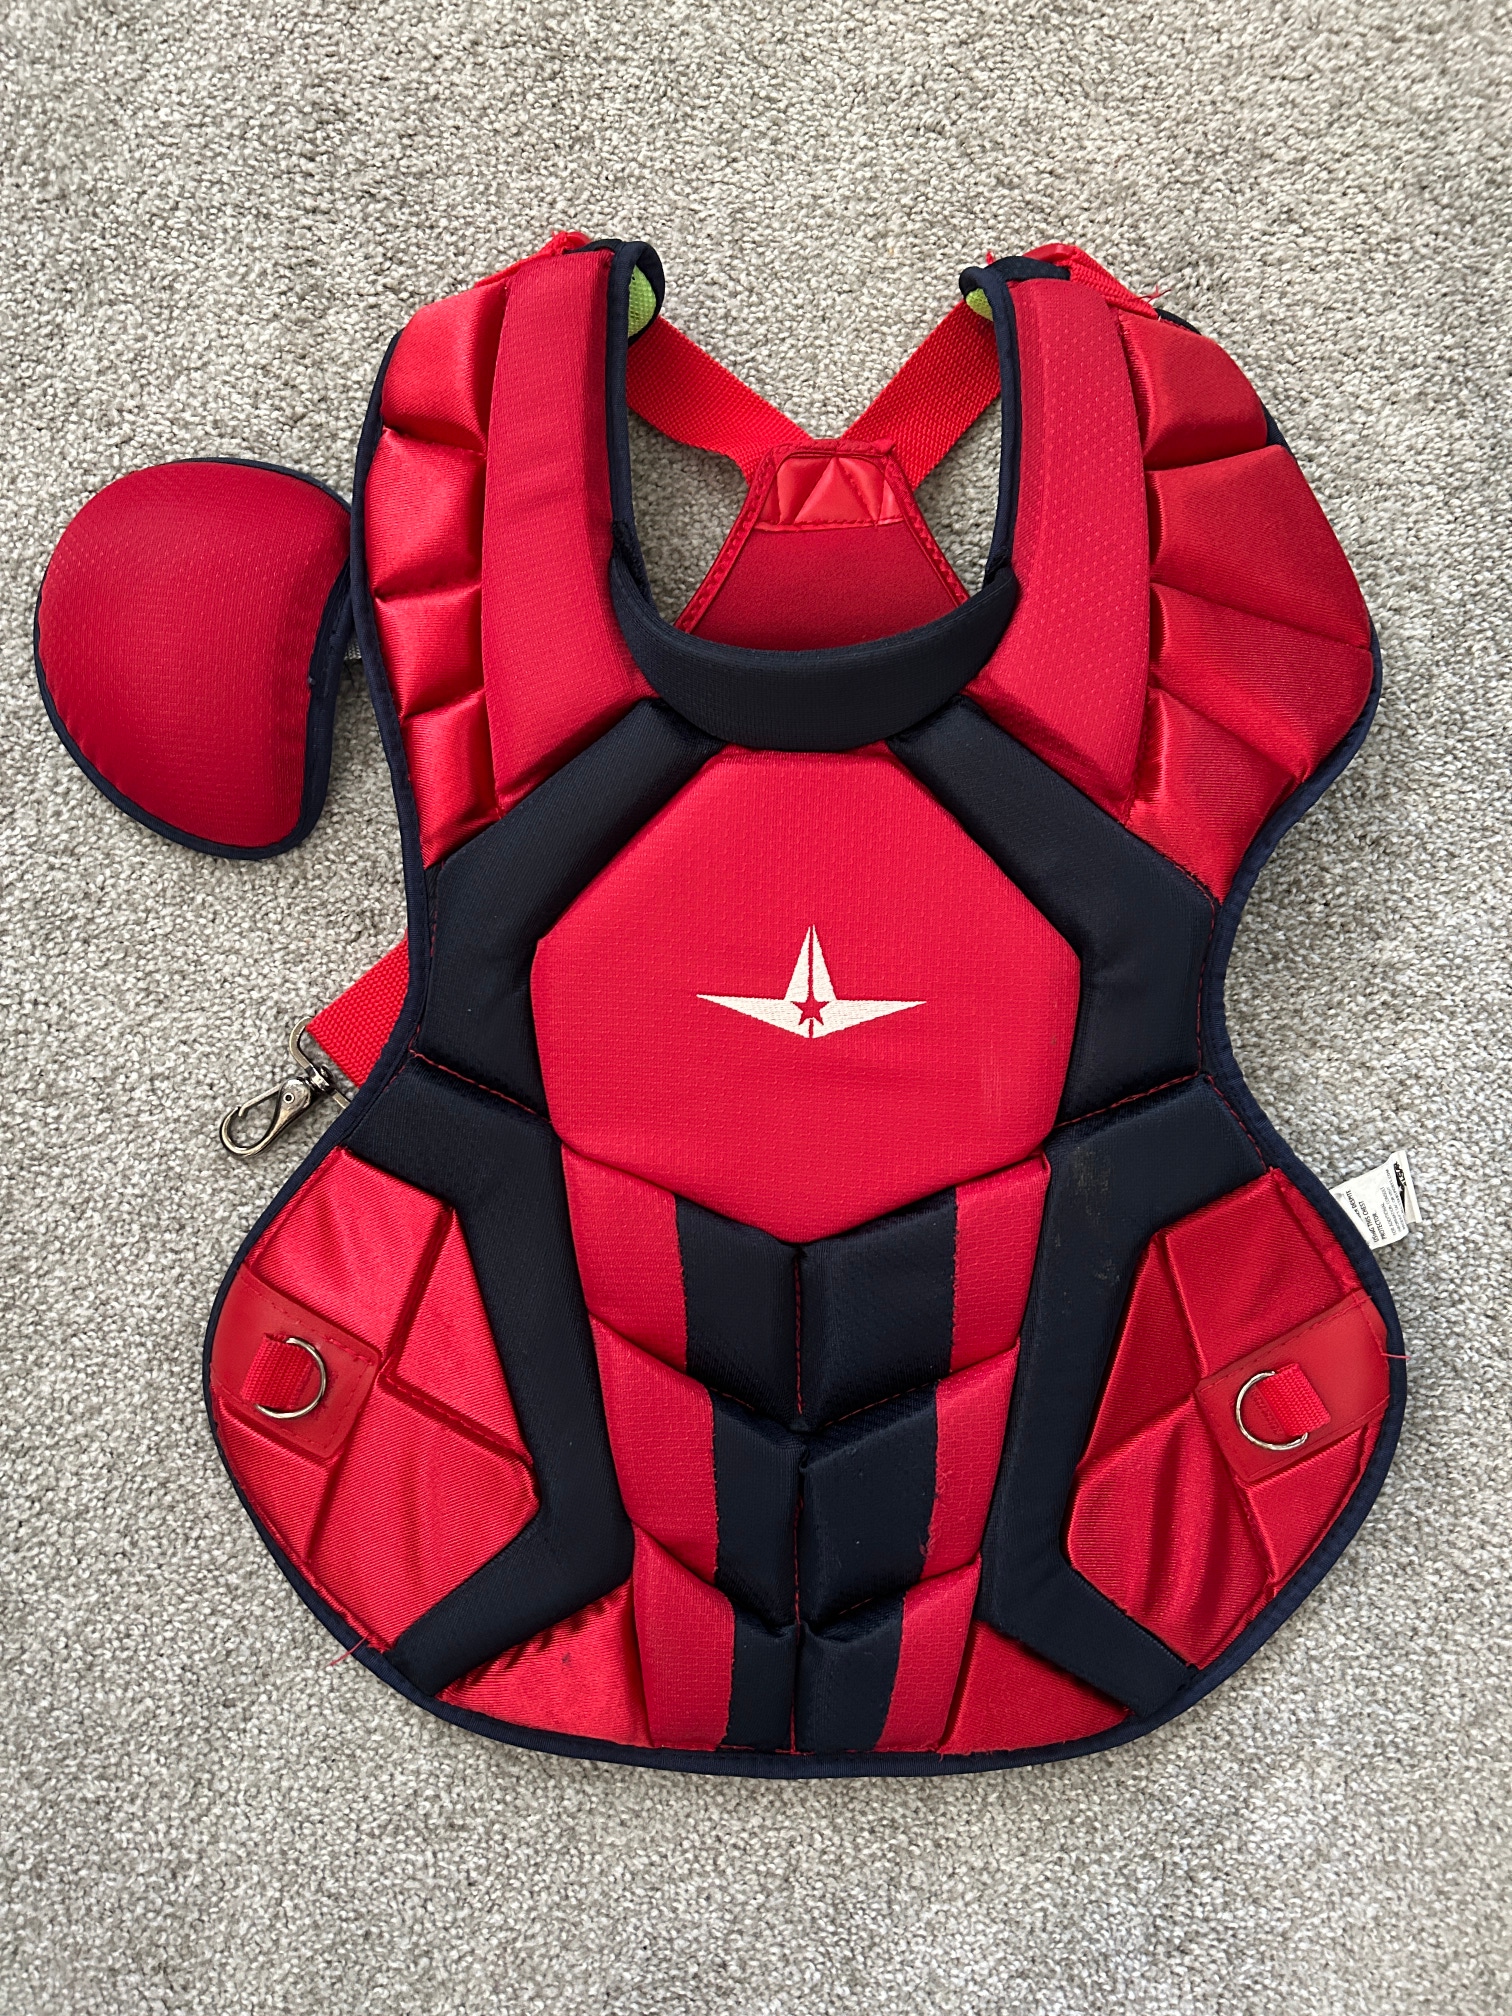 All-Star S7 (System 7) AXIS™ CP50PRO Catcher's Chest Protector - Scarlet/Navy